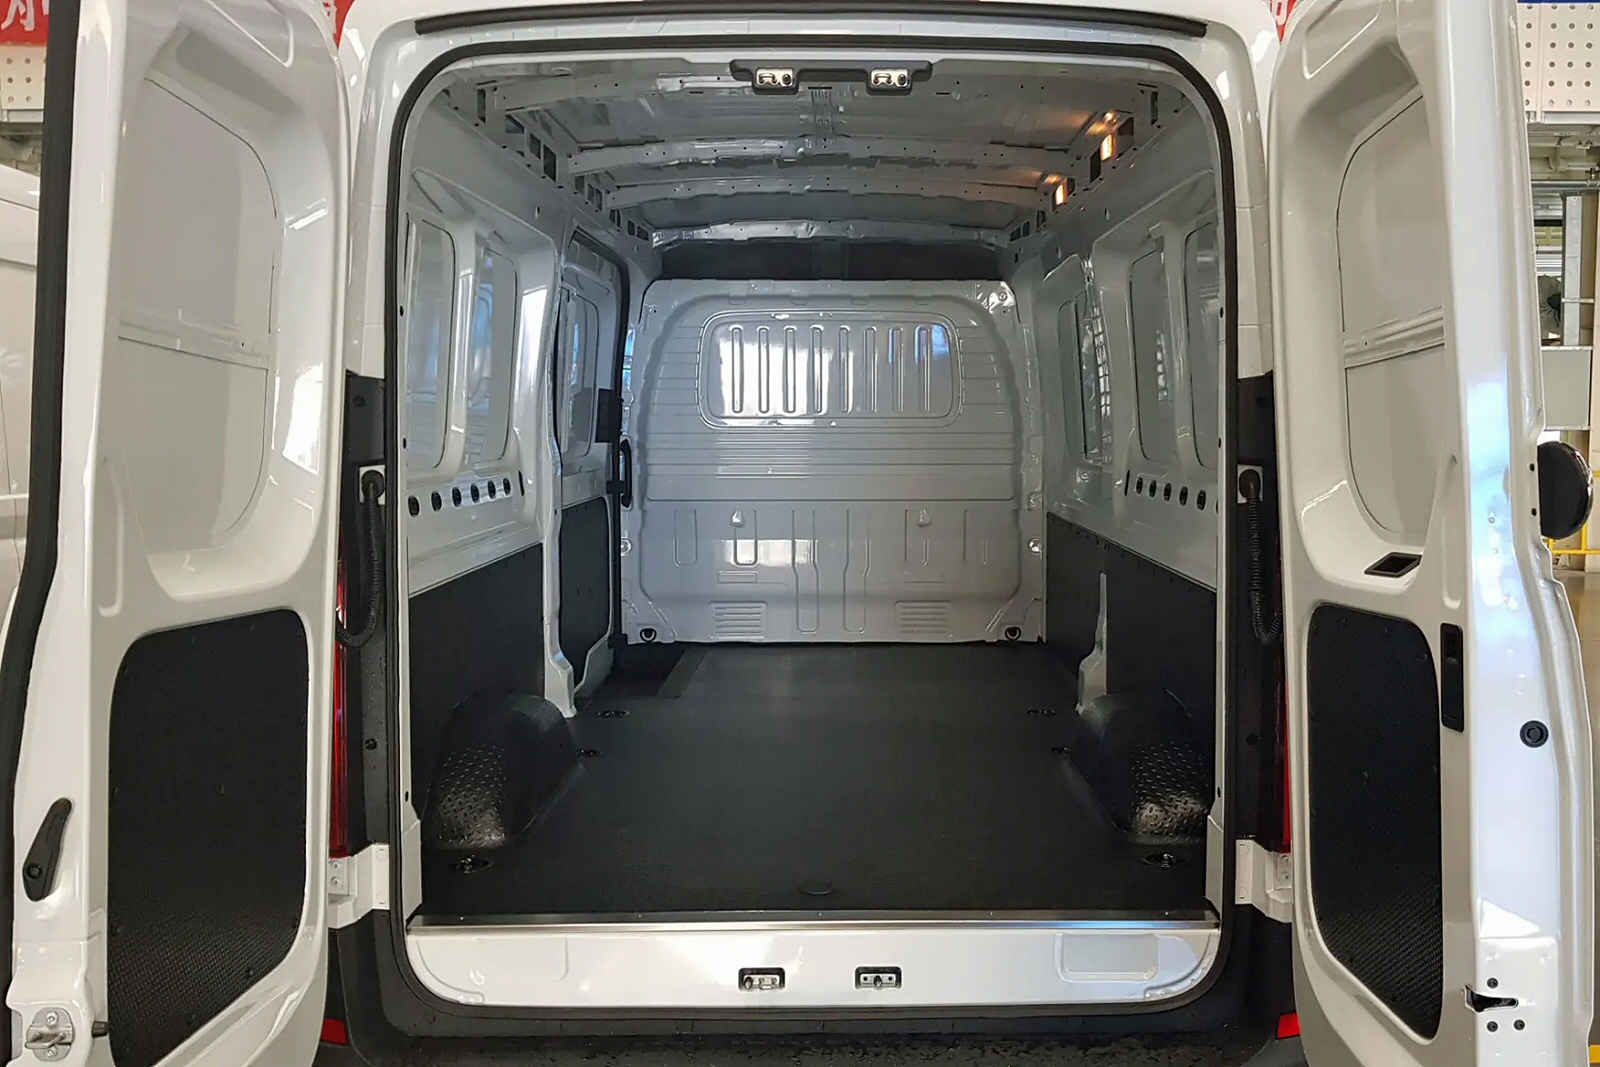 MAXUS E DELIVER 9 LWB ELECTRIC FWD 150kW High Roof Van 72kWh Auto